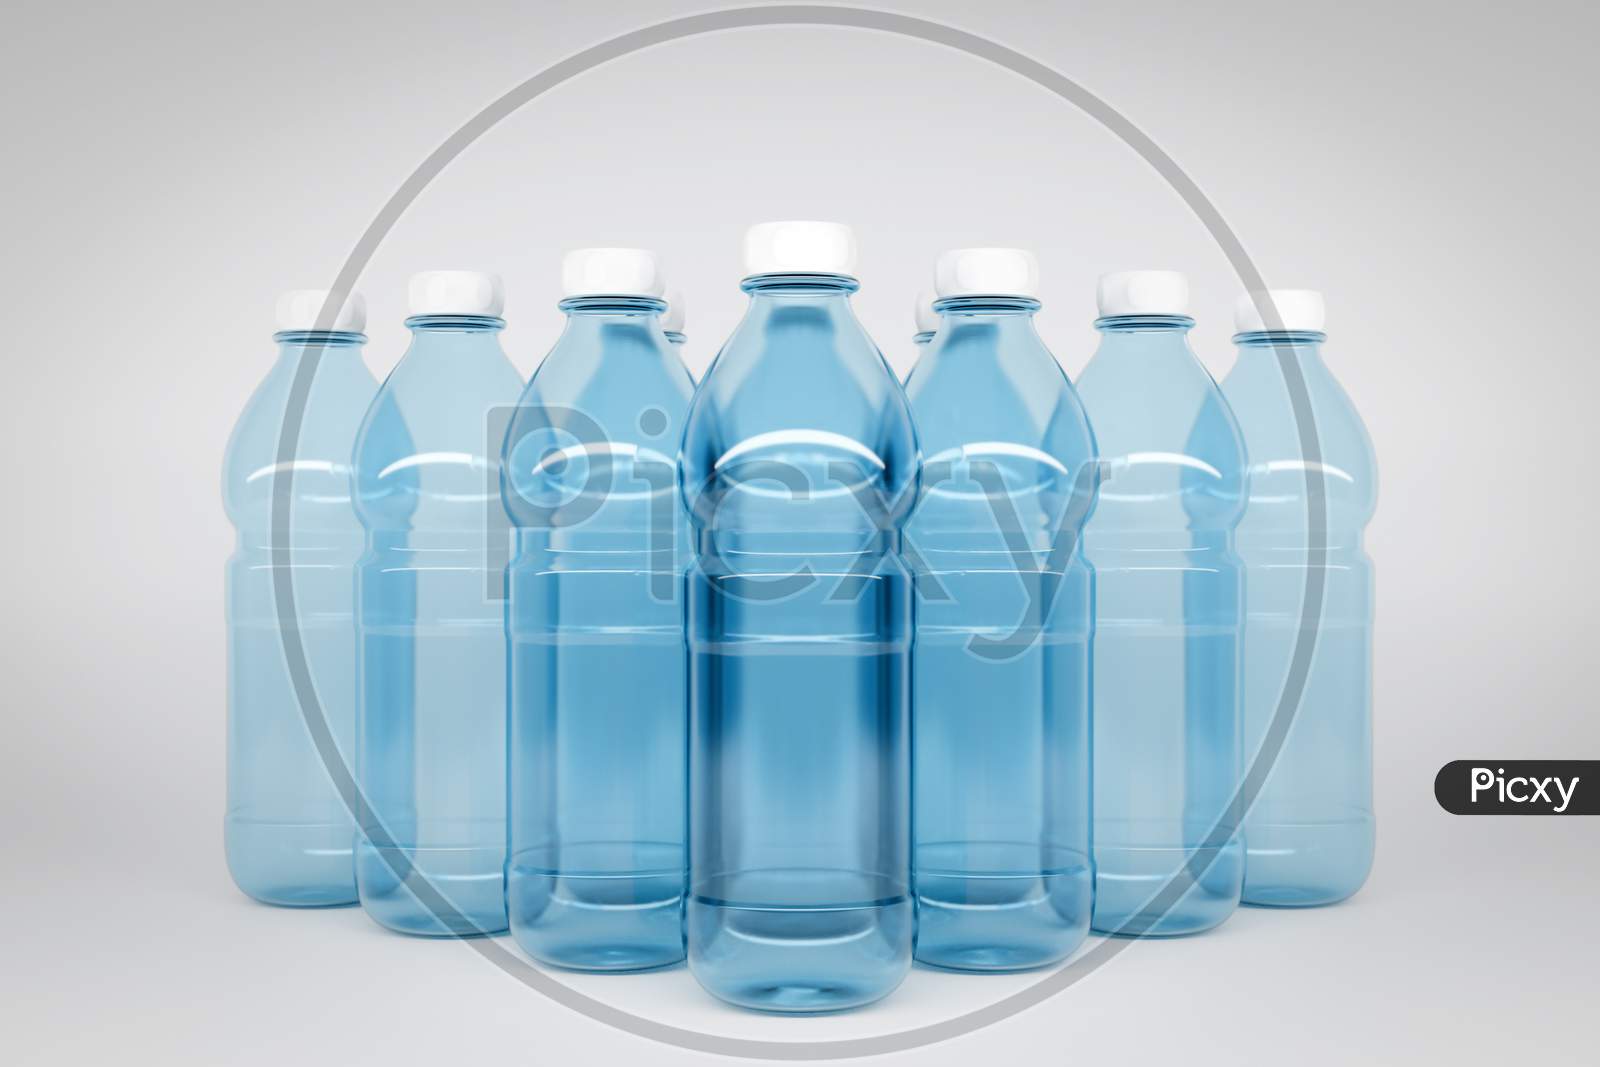 3D Model Of Transparent Plastic Bottles With A Size Of 1.5 Liters. Bottles Stand In Even Rows Symmetrically In The Form Of A Pyramid On A White Isolated Background